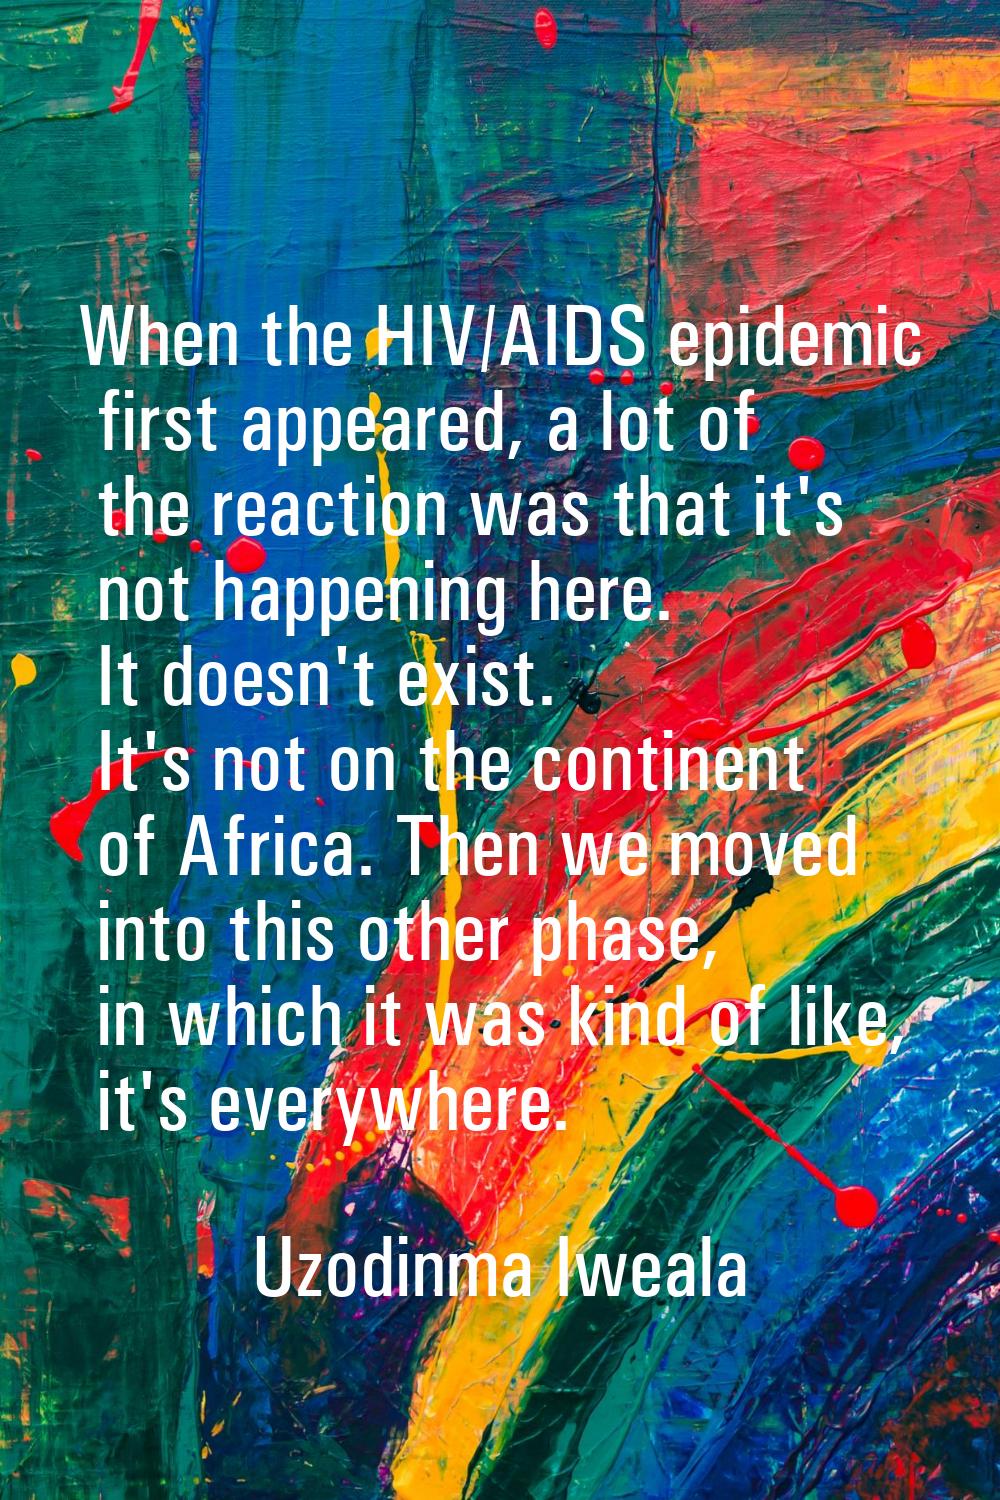 When the HIV/AIDS epidemic first appeared, a lot of the reaction was that it's not happening here. 